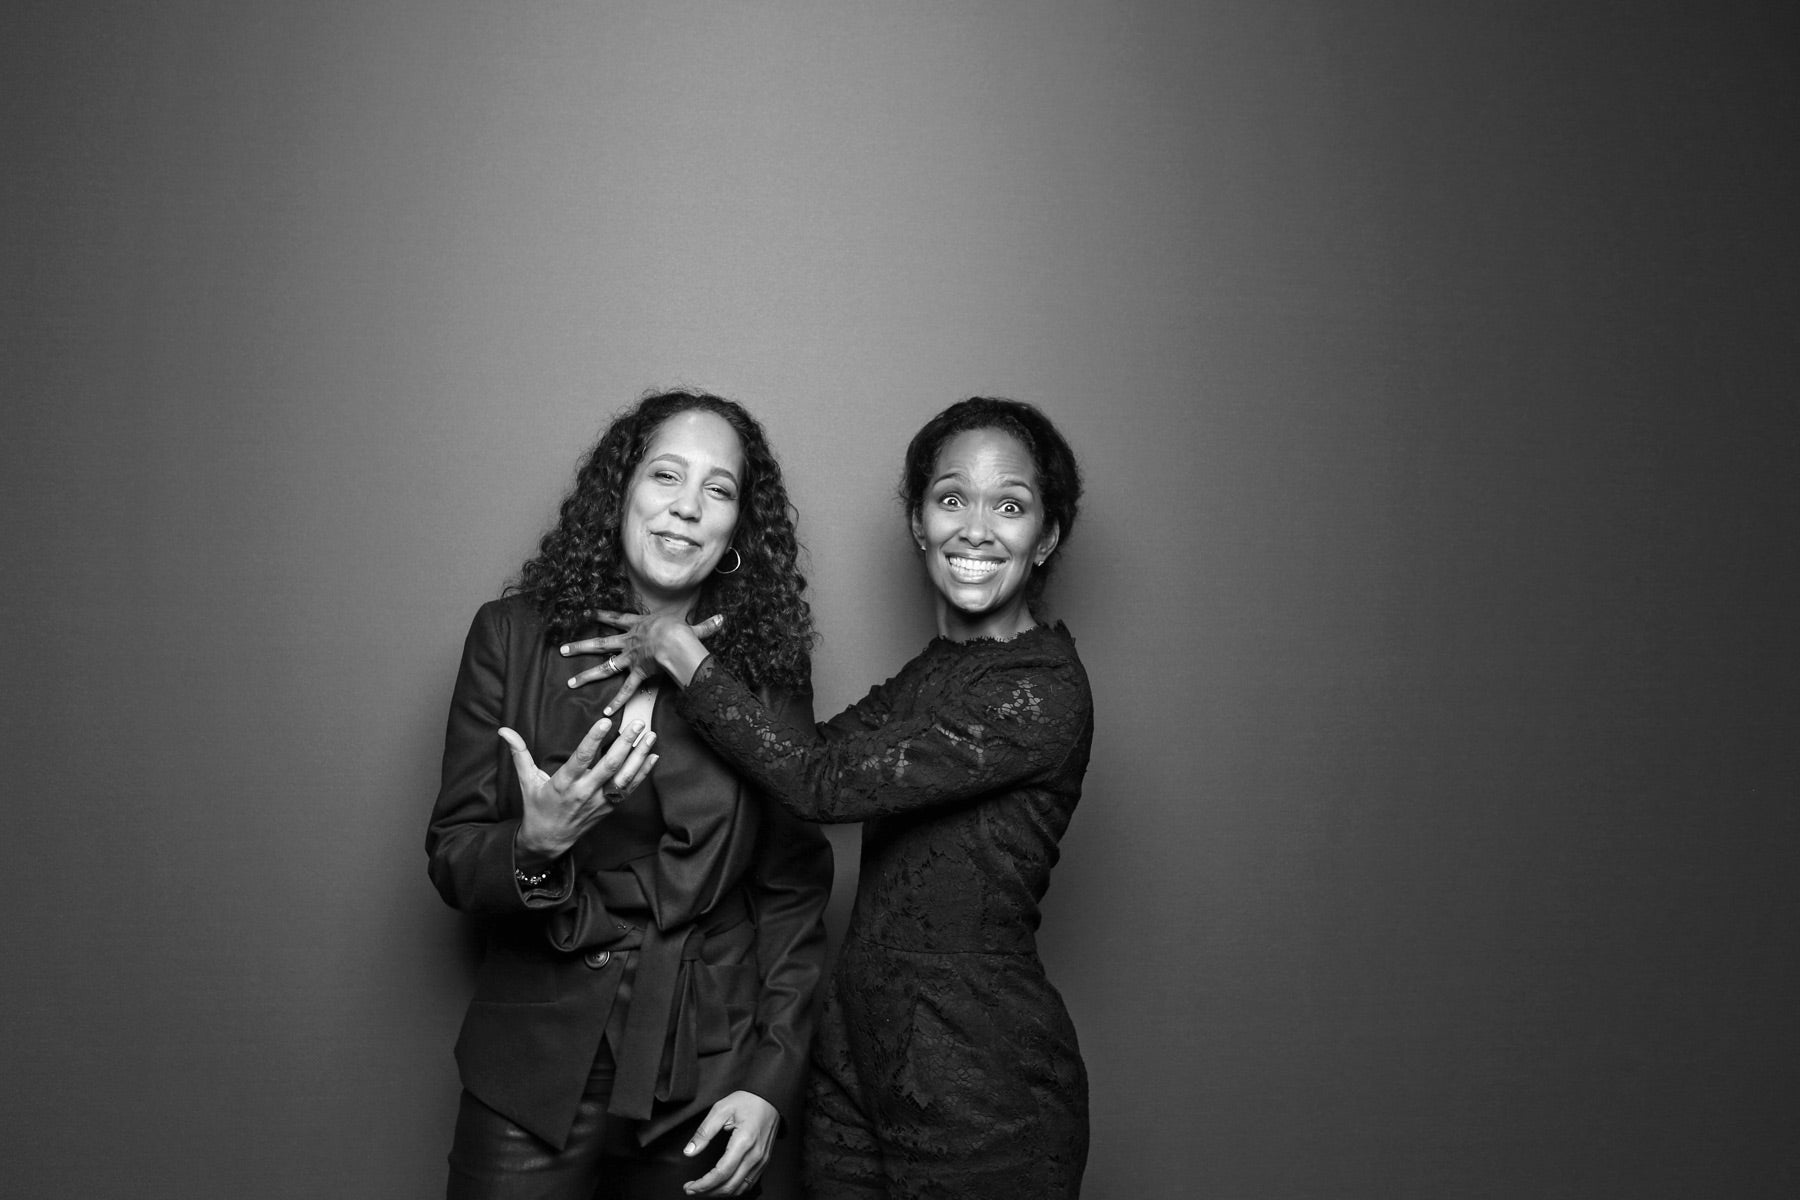 EXCLUSIVE: ESSENCE's 2015 Black Women in Hollywood Photo Booth